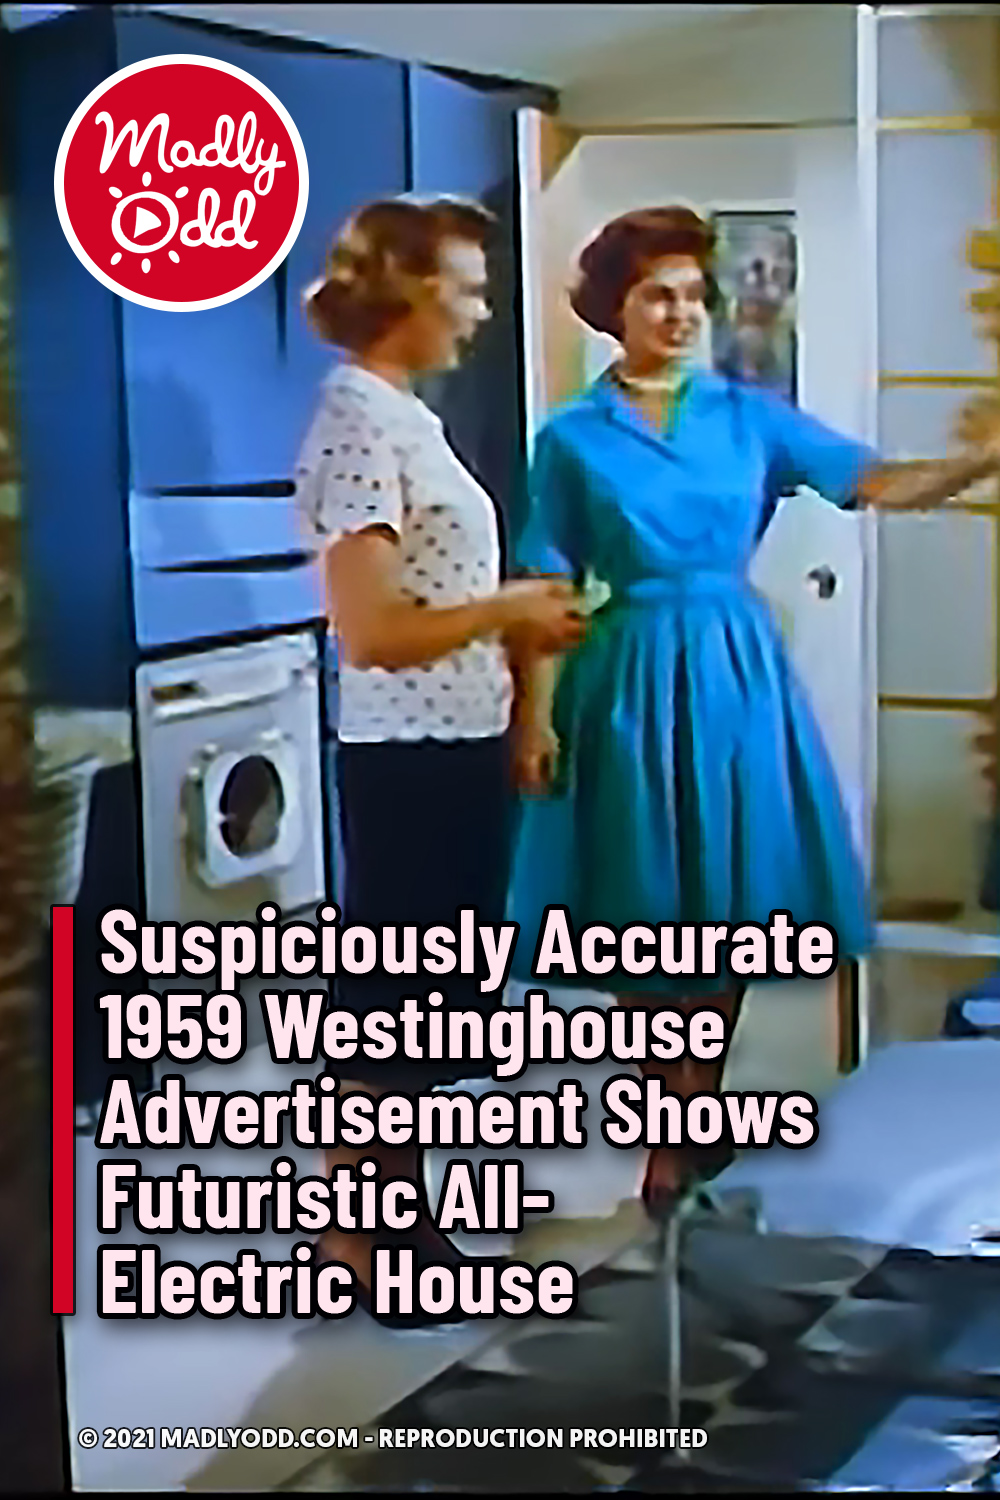 Suspiciously Accurate 1959 Westinghouse Advertisement Shows Futuristic All-Electric House